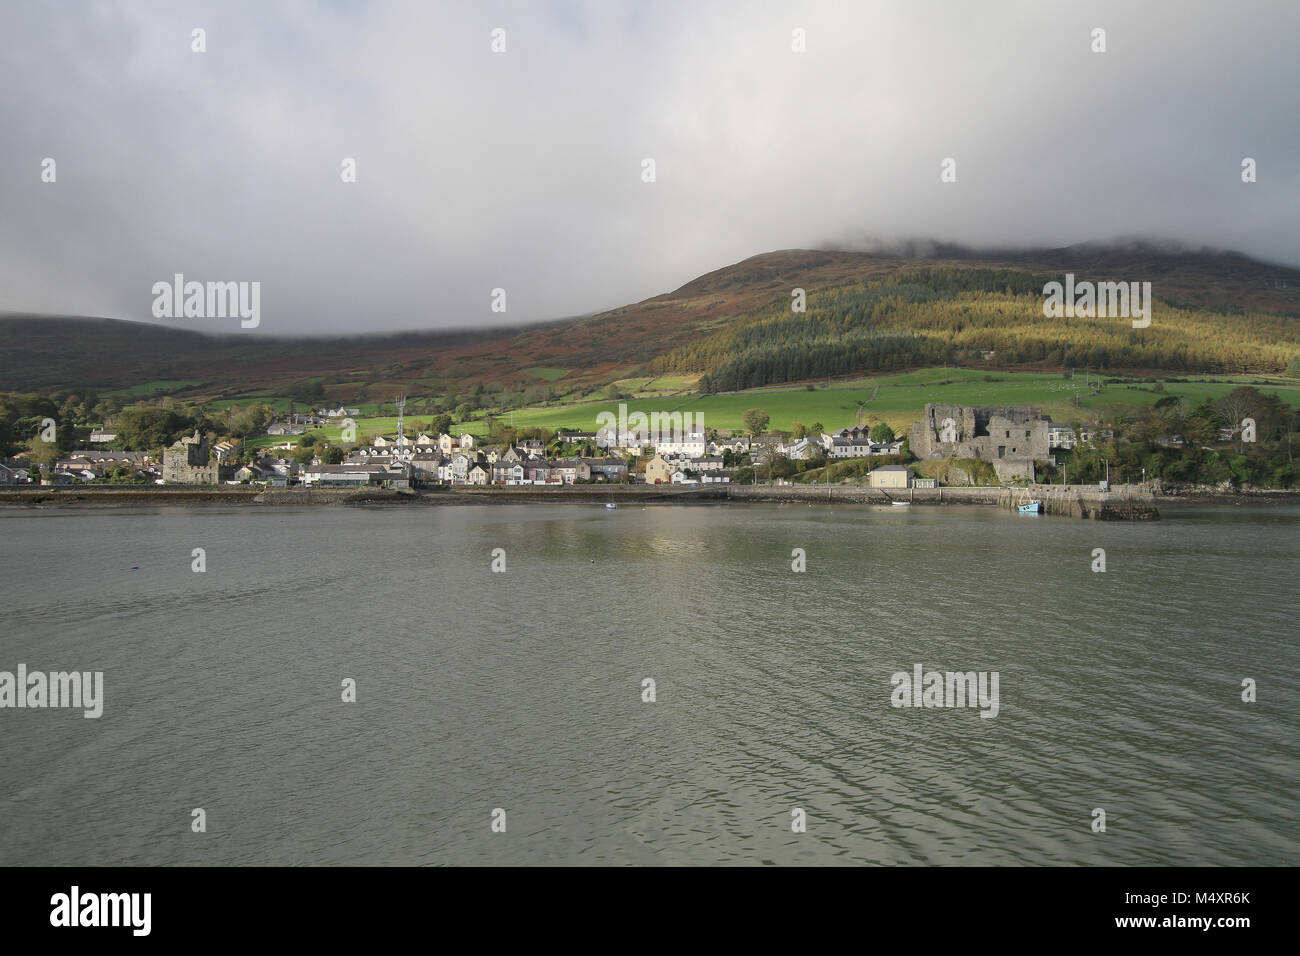 The town and harbour at Carlingford, County Louth, Ireland. Slieve Foy overlooking Carlingford is covered in mist. Stock Photo